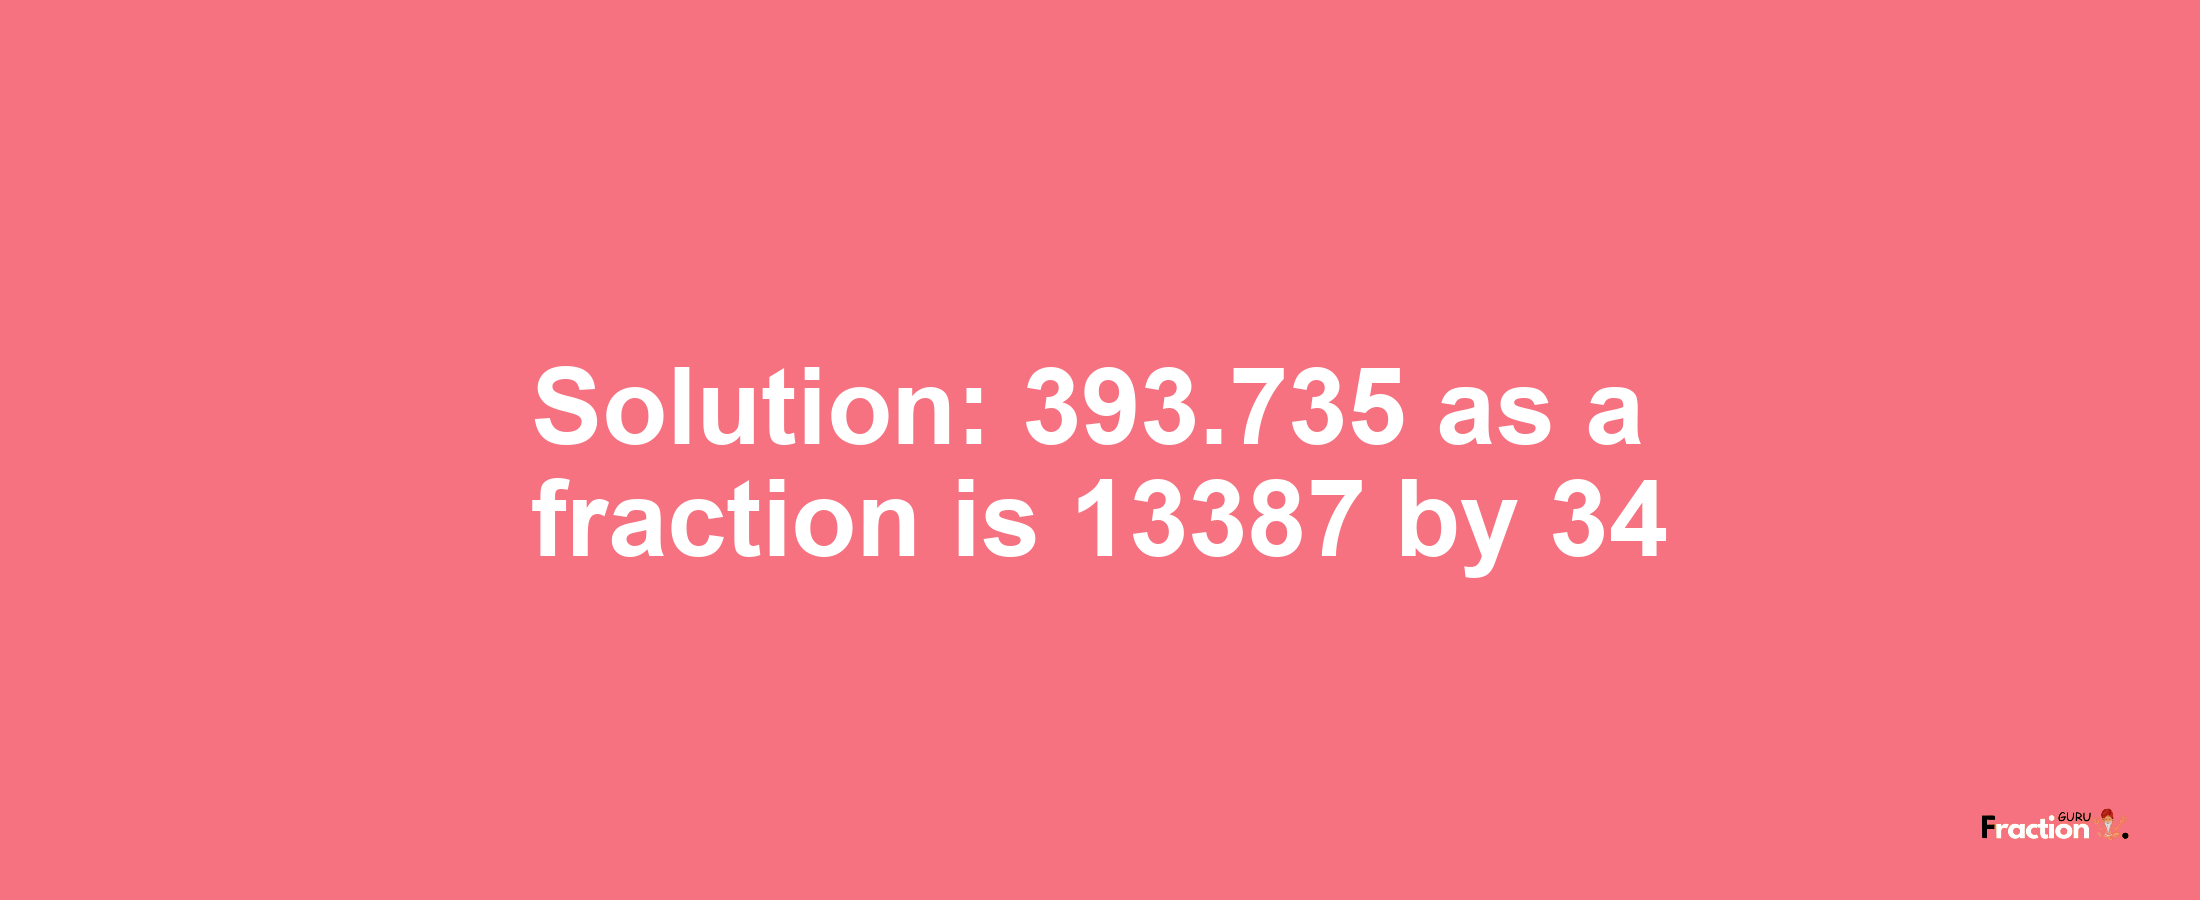 Solution:393.735 as a fraction is 13387/34